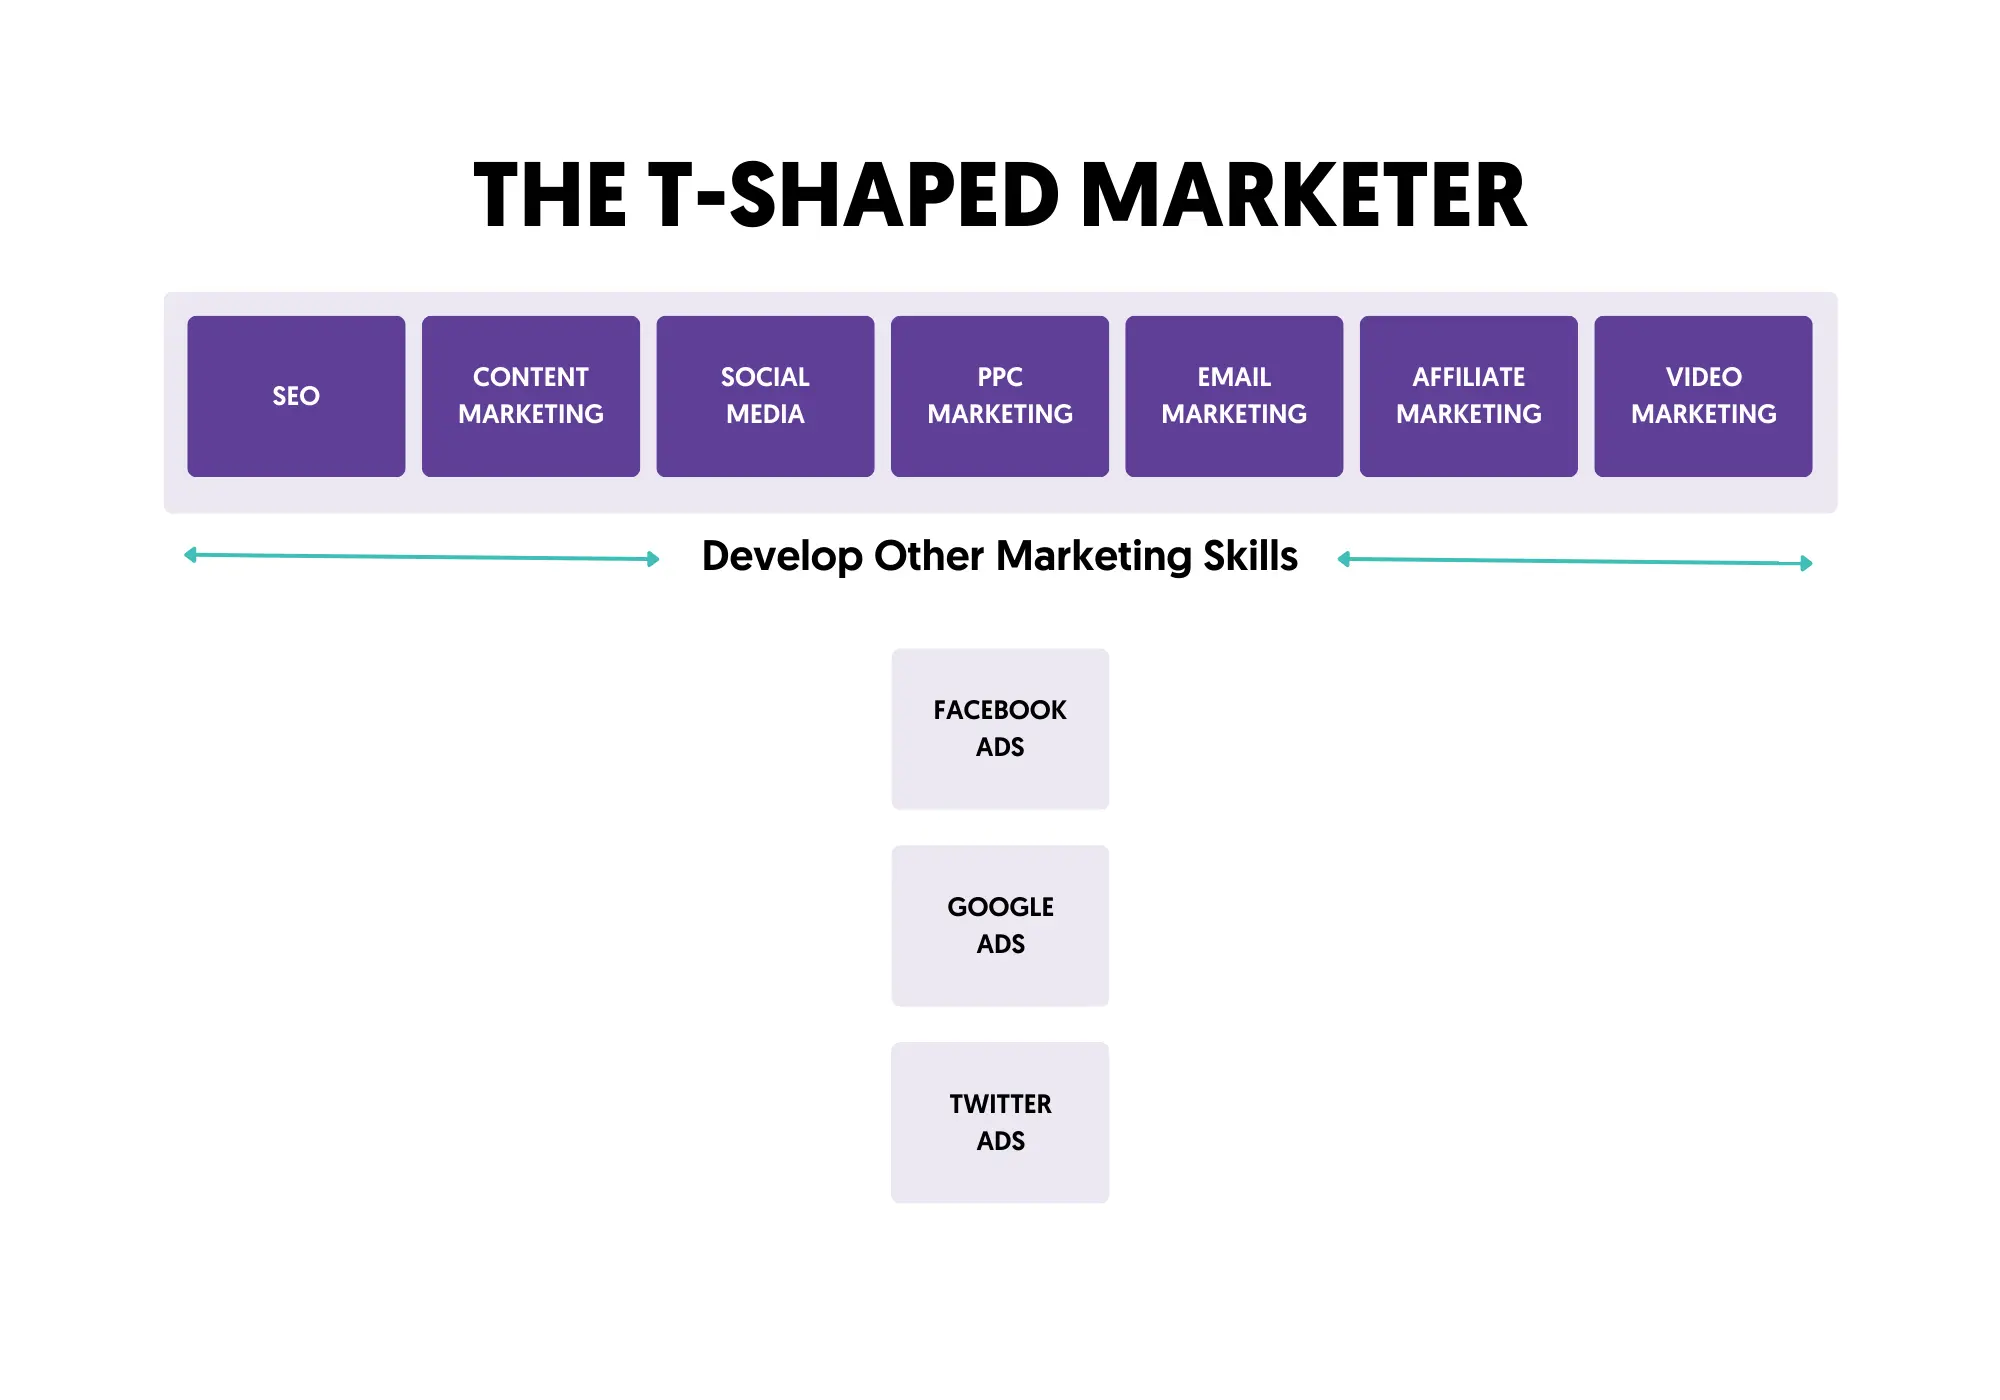 How to become a T-shaped marketer in 2023